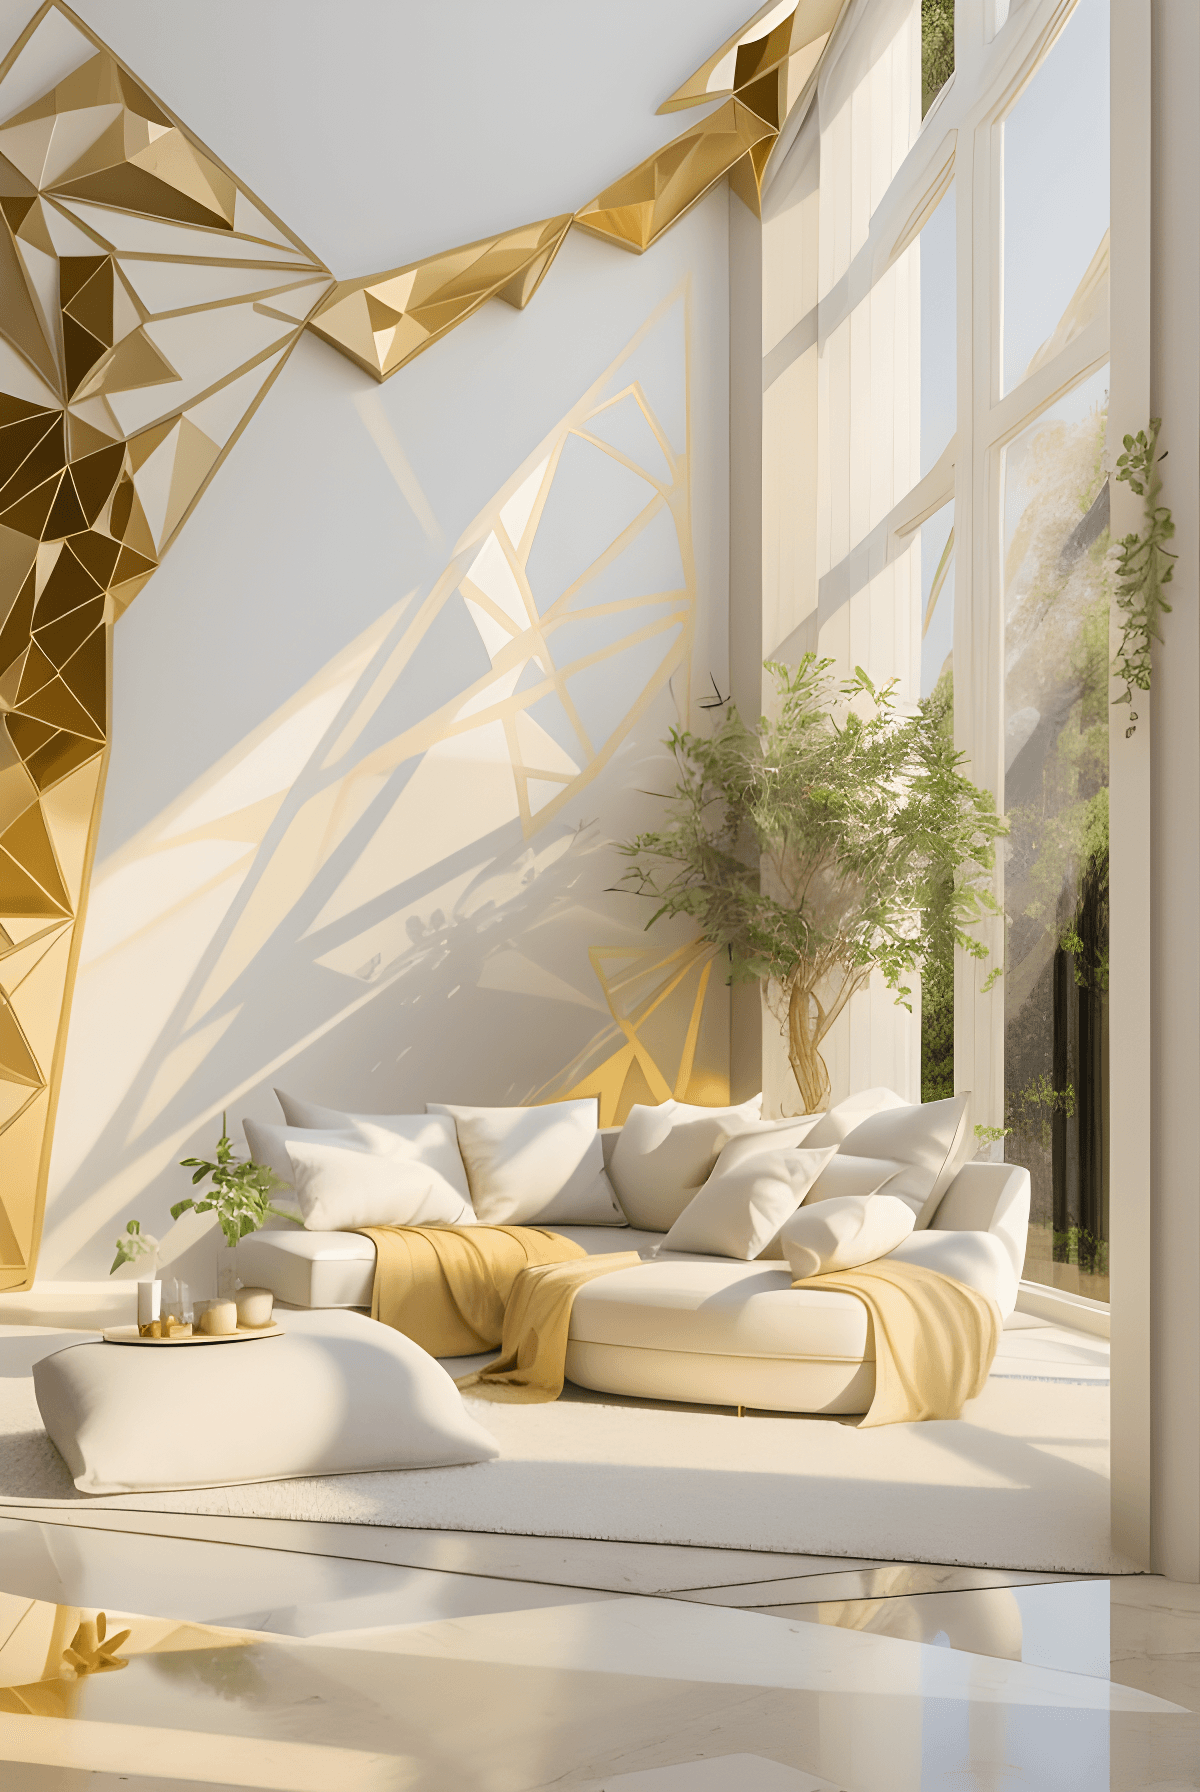 Designed by UPSCALE -> Interior rendering, sunlight, afternoon light, daylight, trees, white, couch, luxury, limestone wall ...